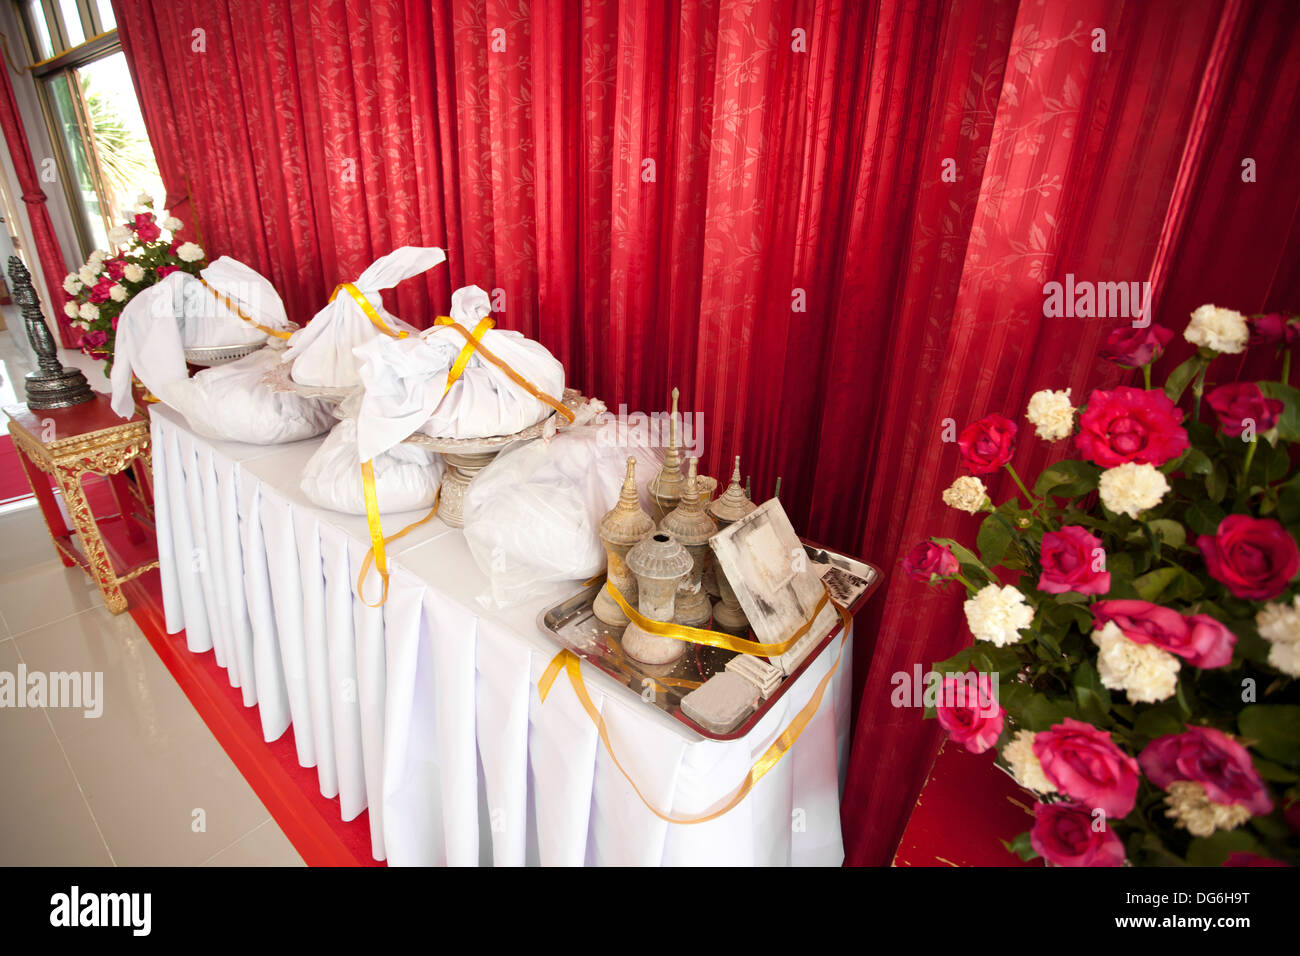 cremains, bone ash kept into package after funeral in Thai tradition Stock Photo